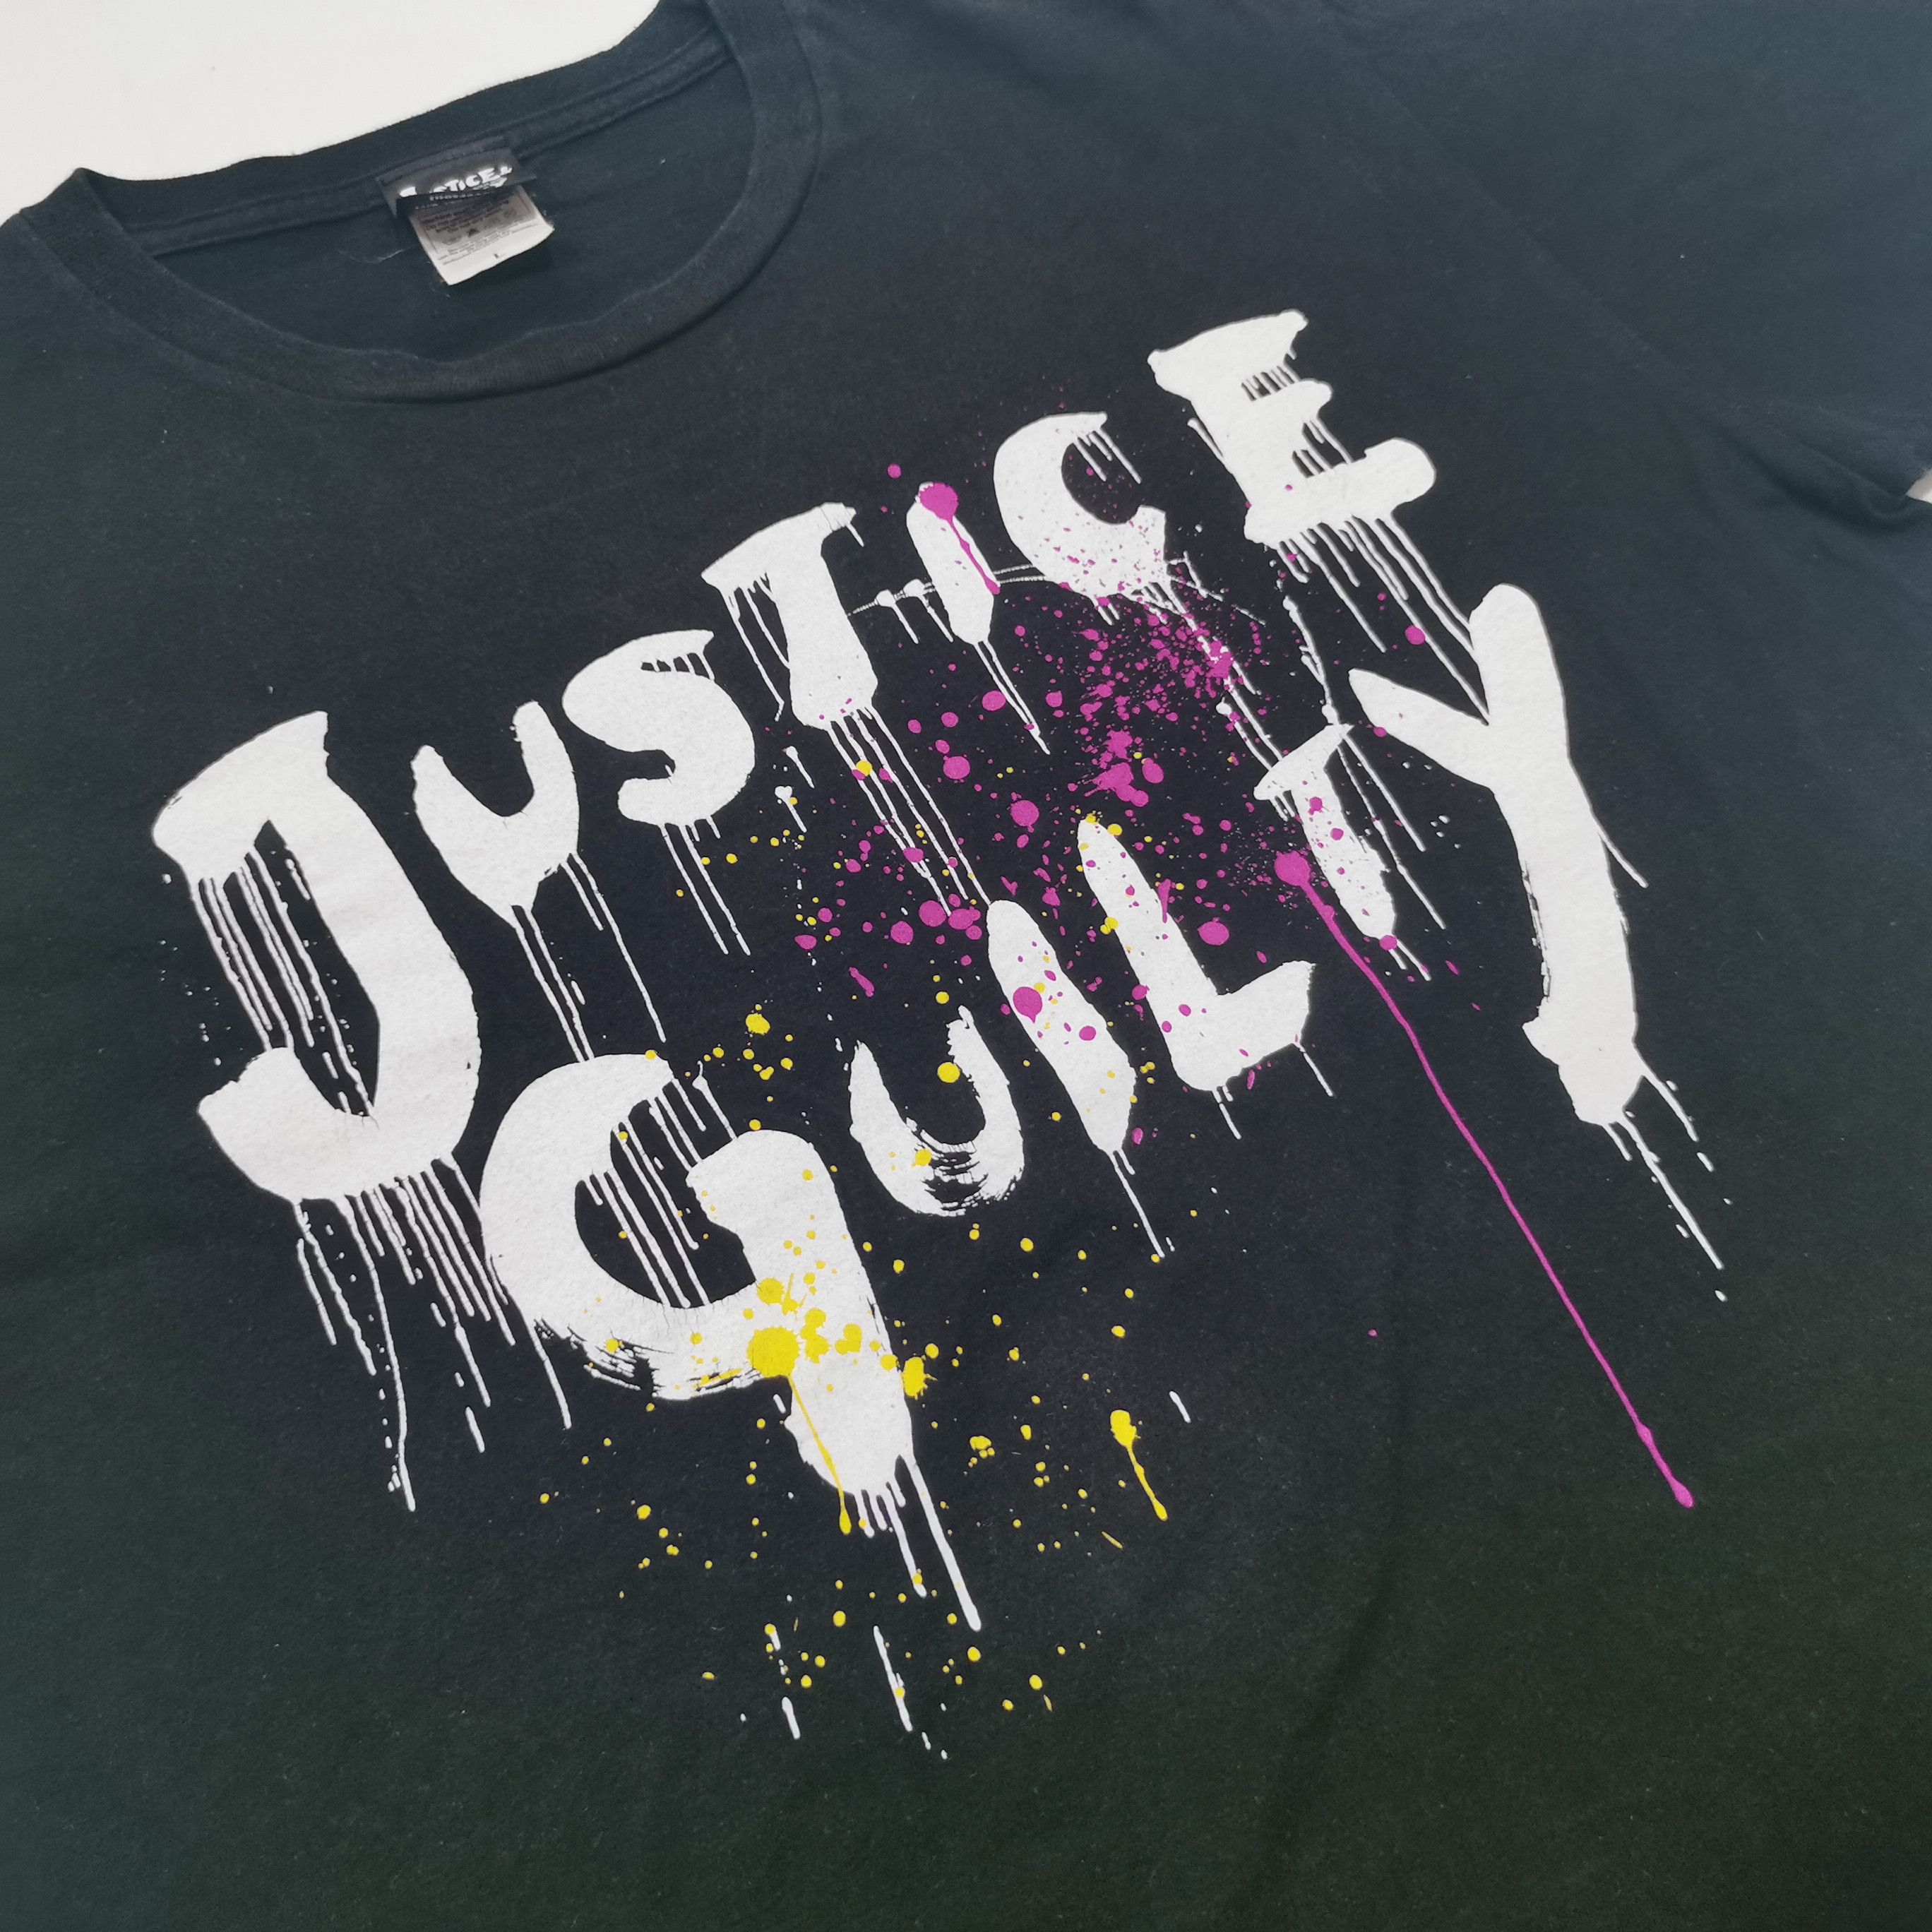 Japanese Brand - GLAY Arena Tour 2013 Justice and Guilty Japanese Band Tshirt - 2